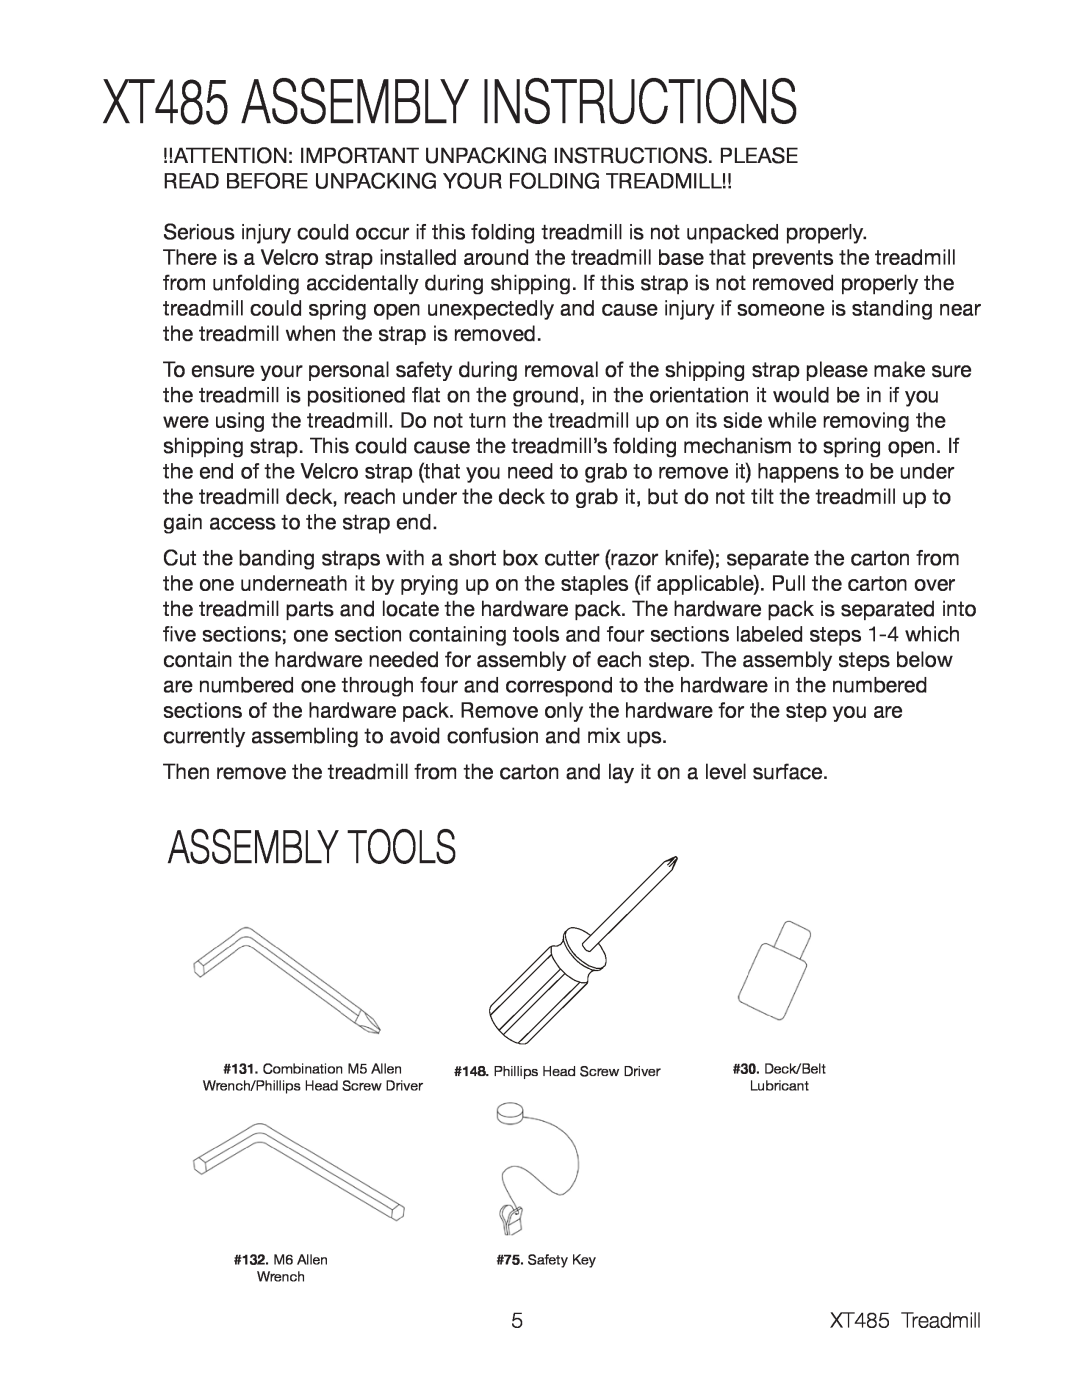 Spirit owner manual XT485 ASSEMBLY INSTRUCTIONS, Assembly Tools 